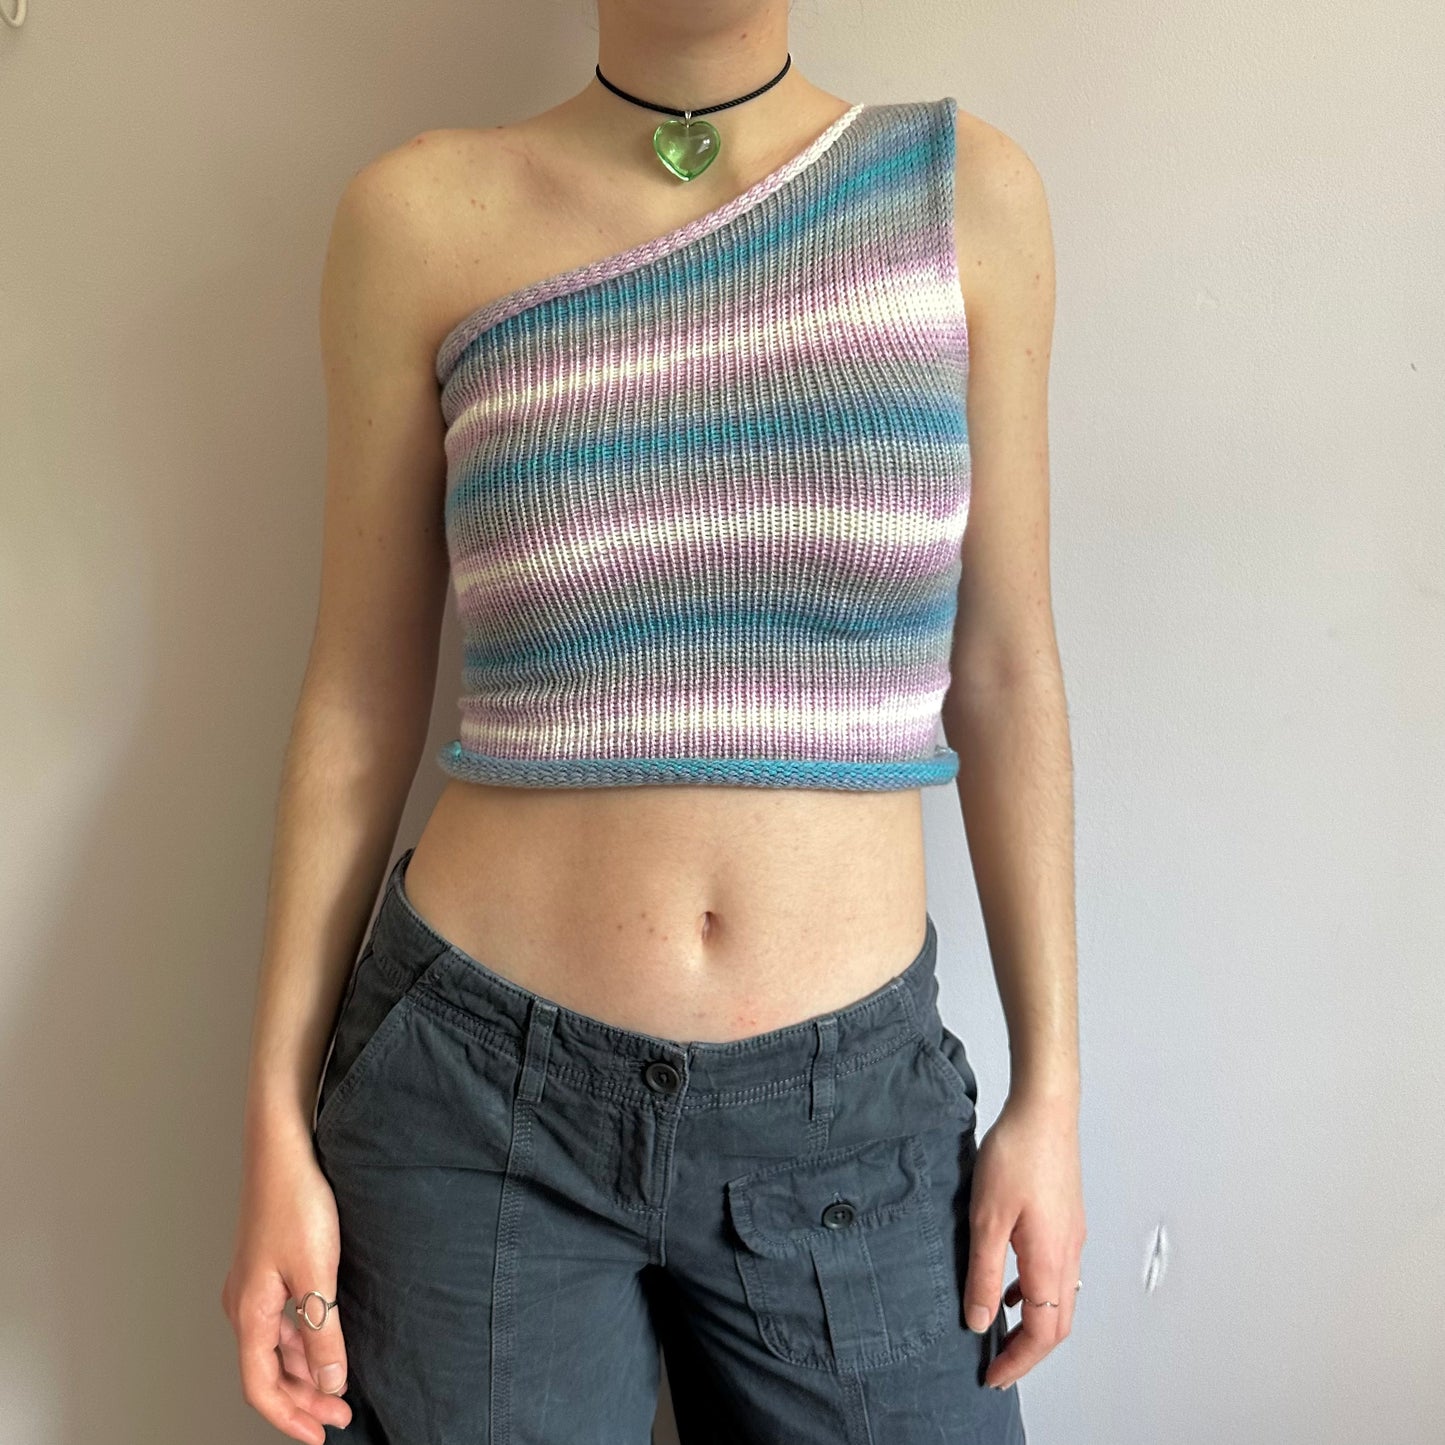 Handmade knitted one shoulder asymmetrical top in blue, lilac and white